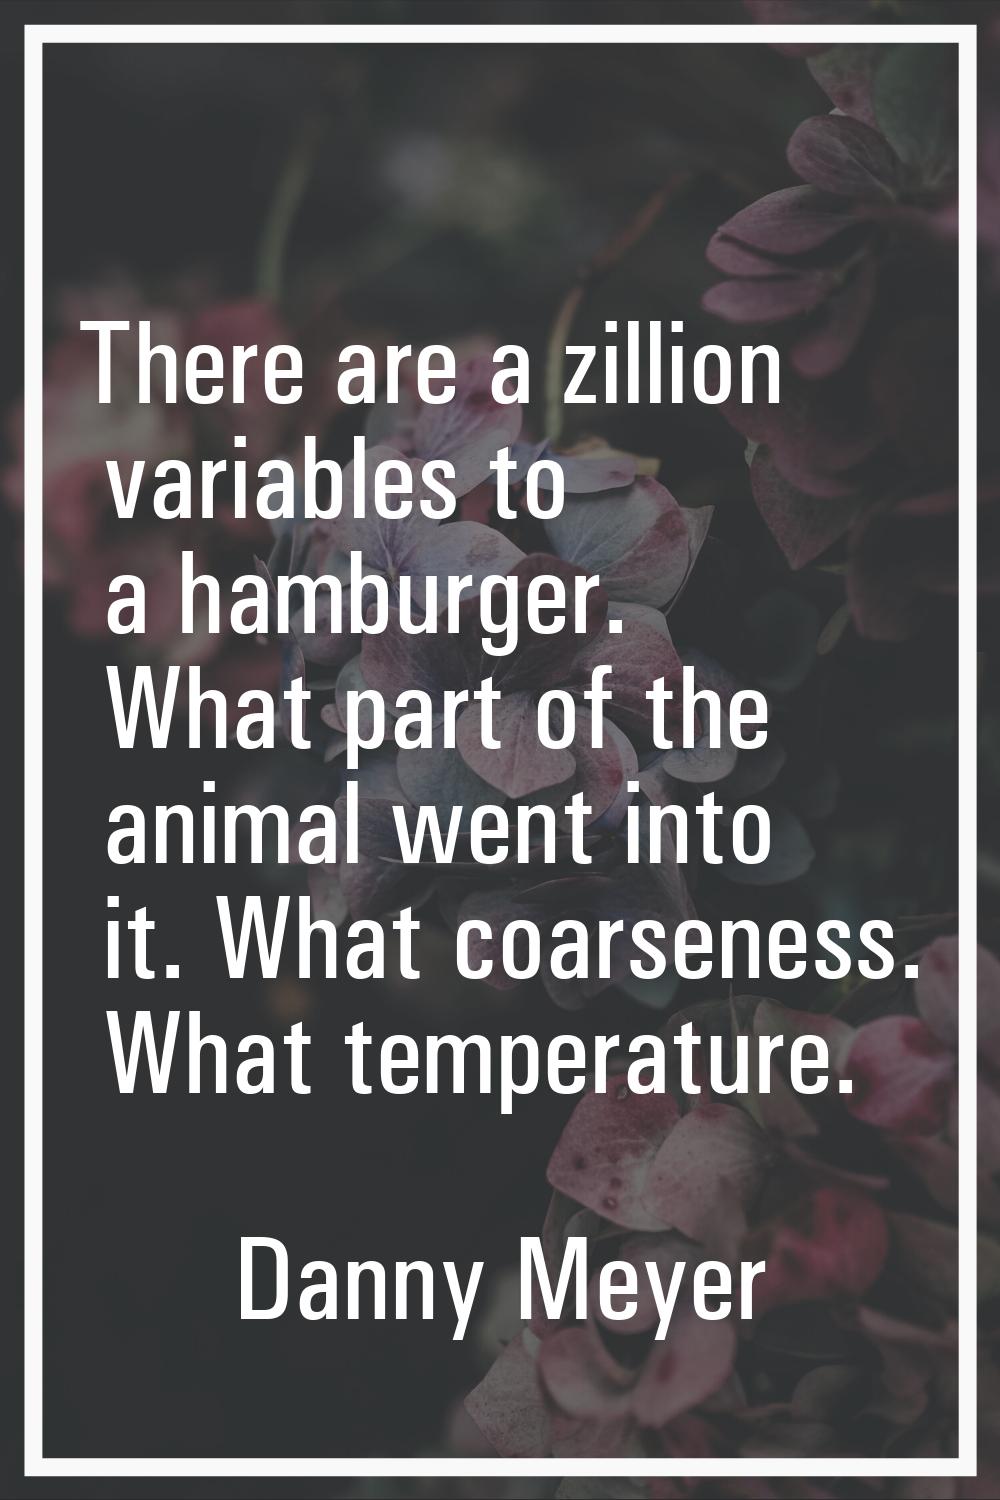 There are a zillion variables to a hamburger. What part of the animal went into it. What coarseness